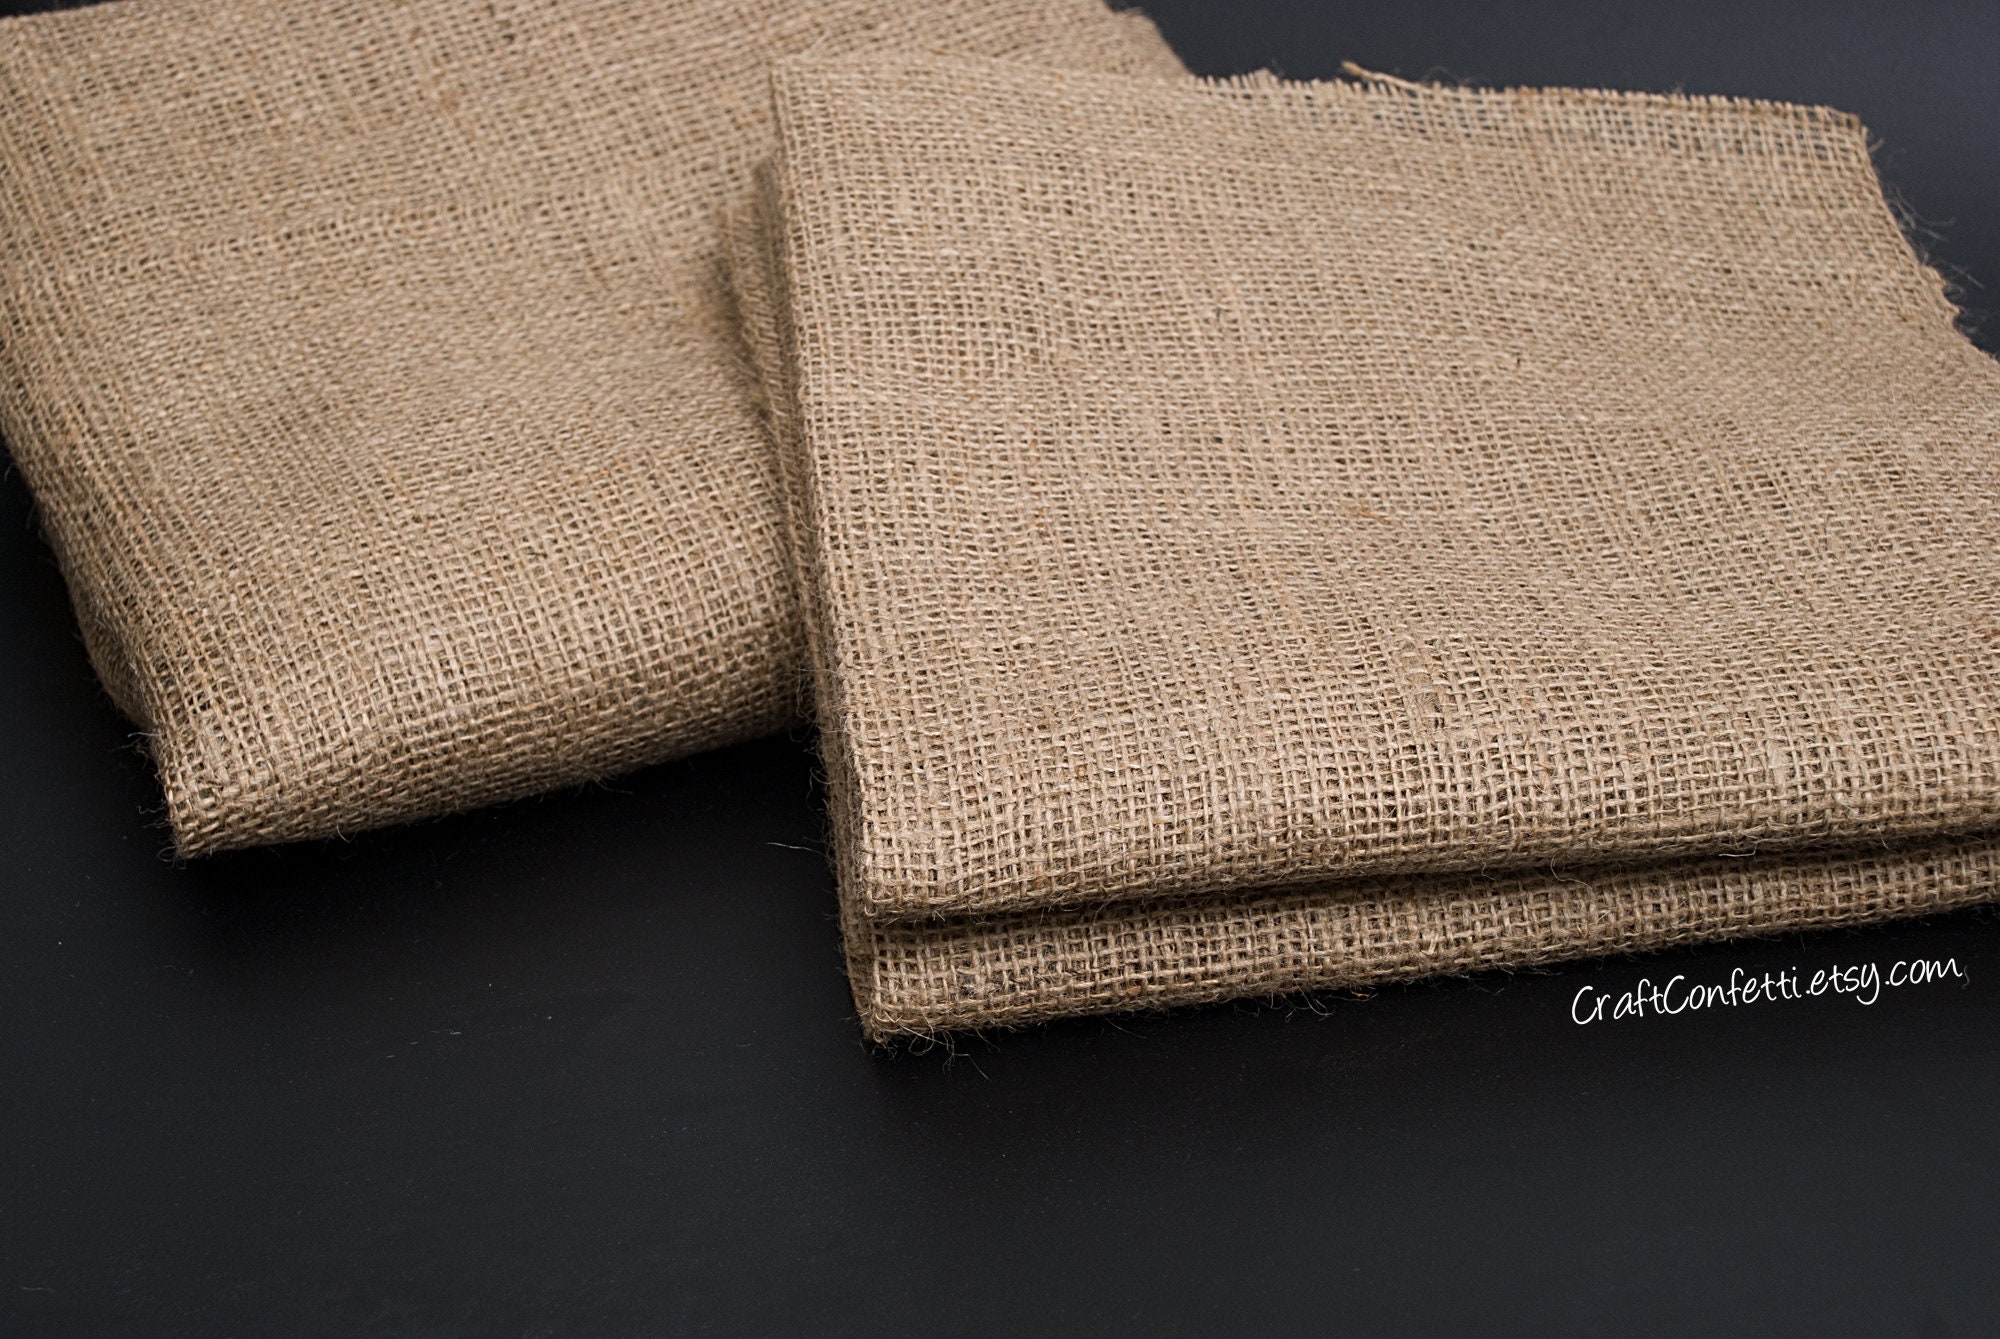 Natural hessian jute sack fabric SOLD PER 5 METRES 40w upholstery garden  use